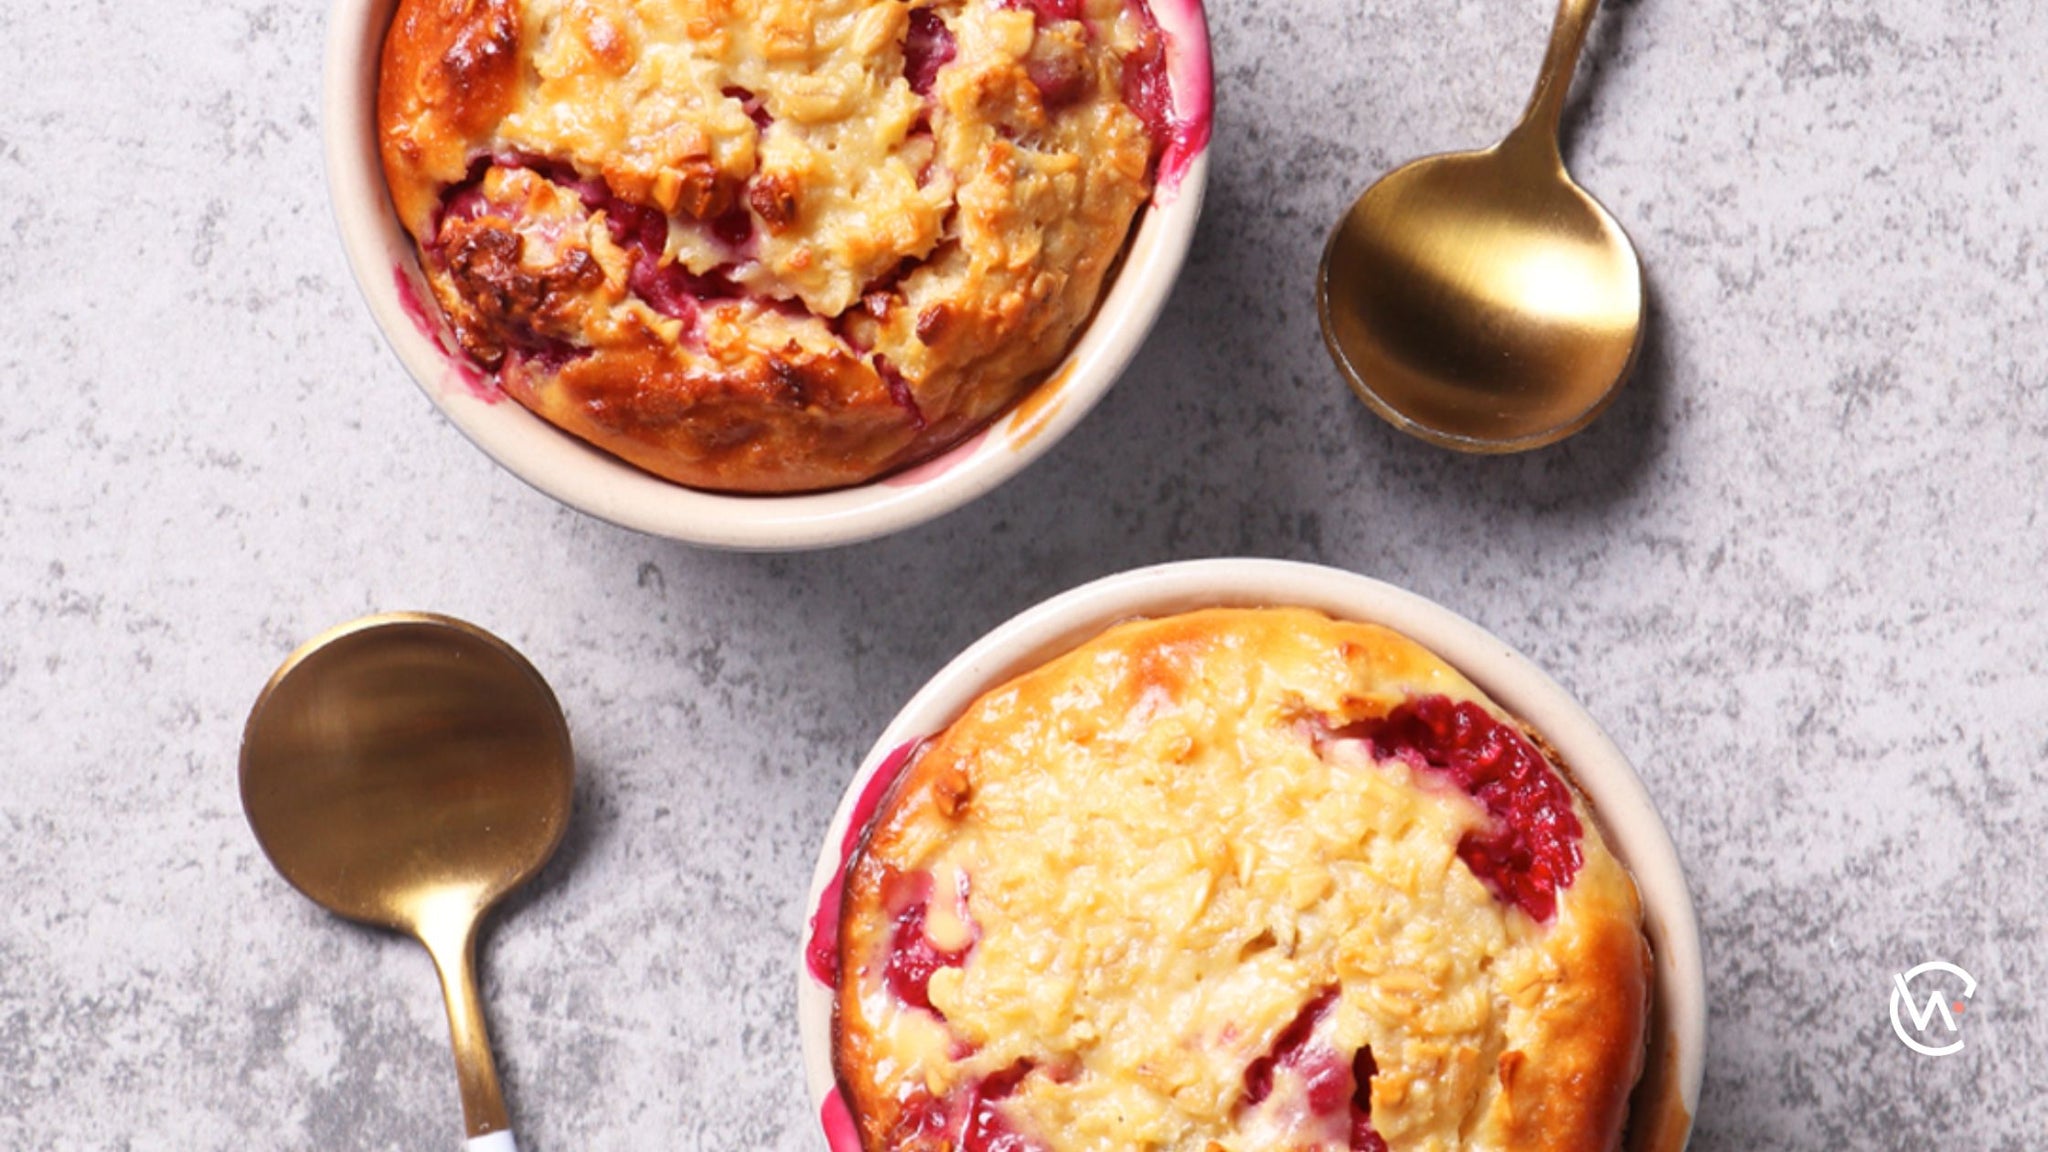 Berrylicious baked oats